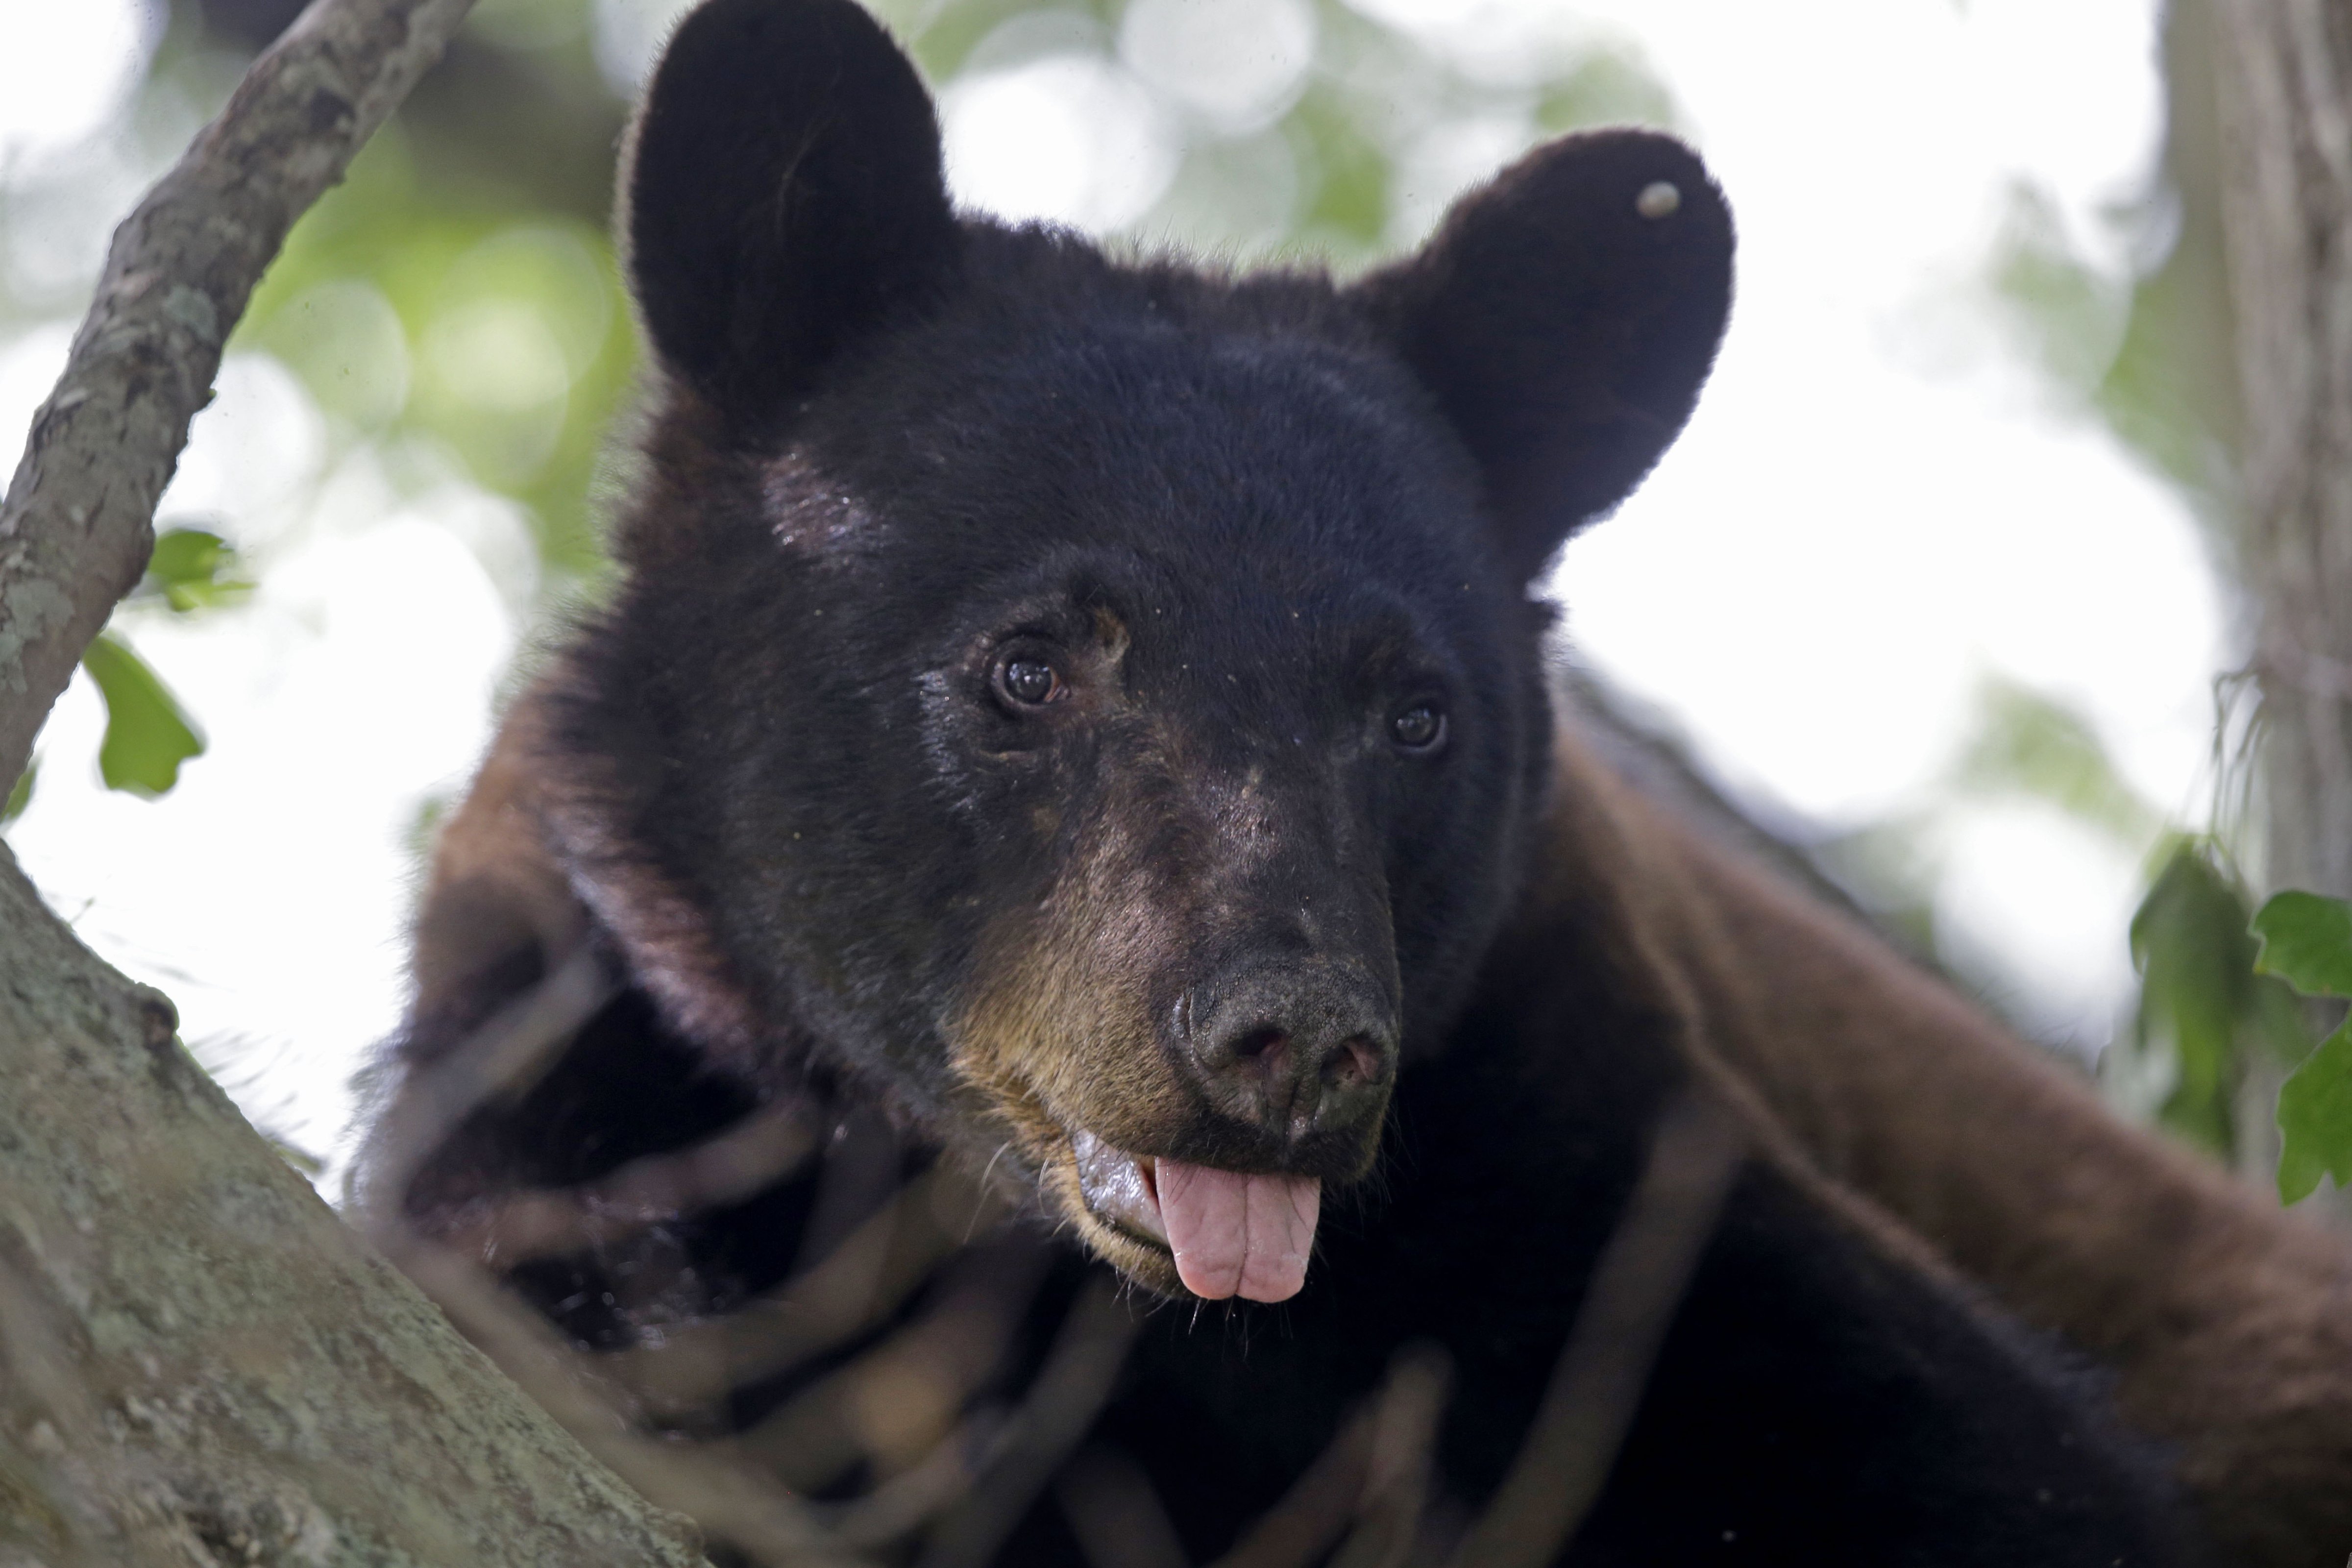 In this May 17, 2015 photo, a Louisiana Black Bear, sub-species of the black bear that is protected under the Endangered Species Act, is seen in a water oak tree in Marksville, La. (Gerald Herbert—AP)